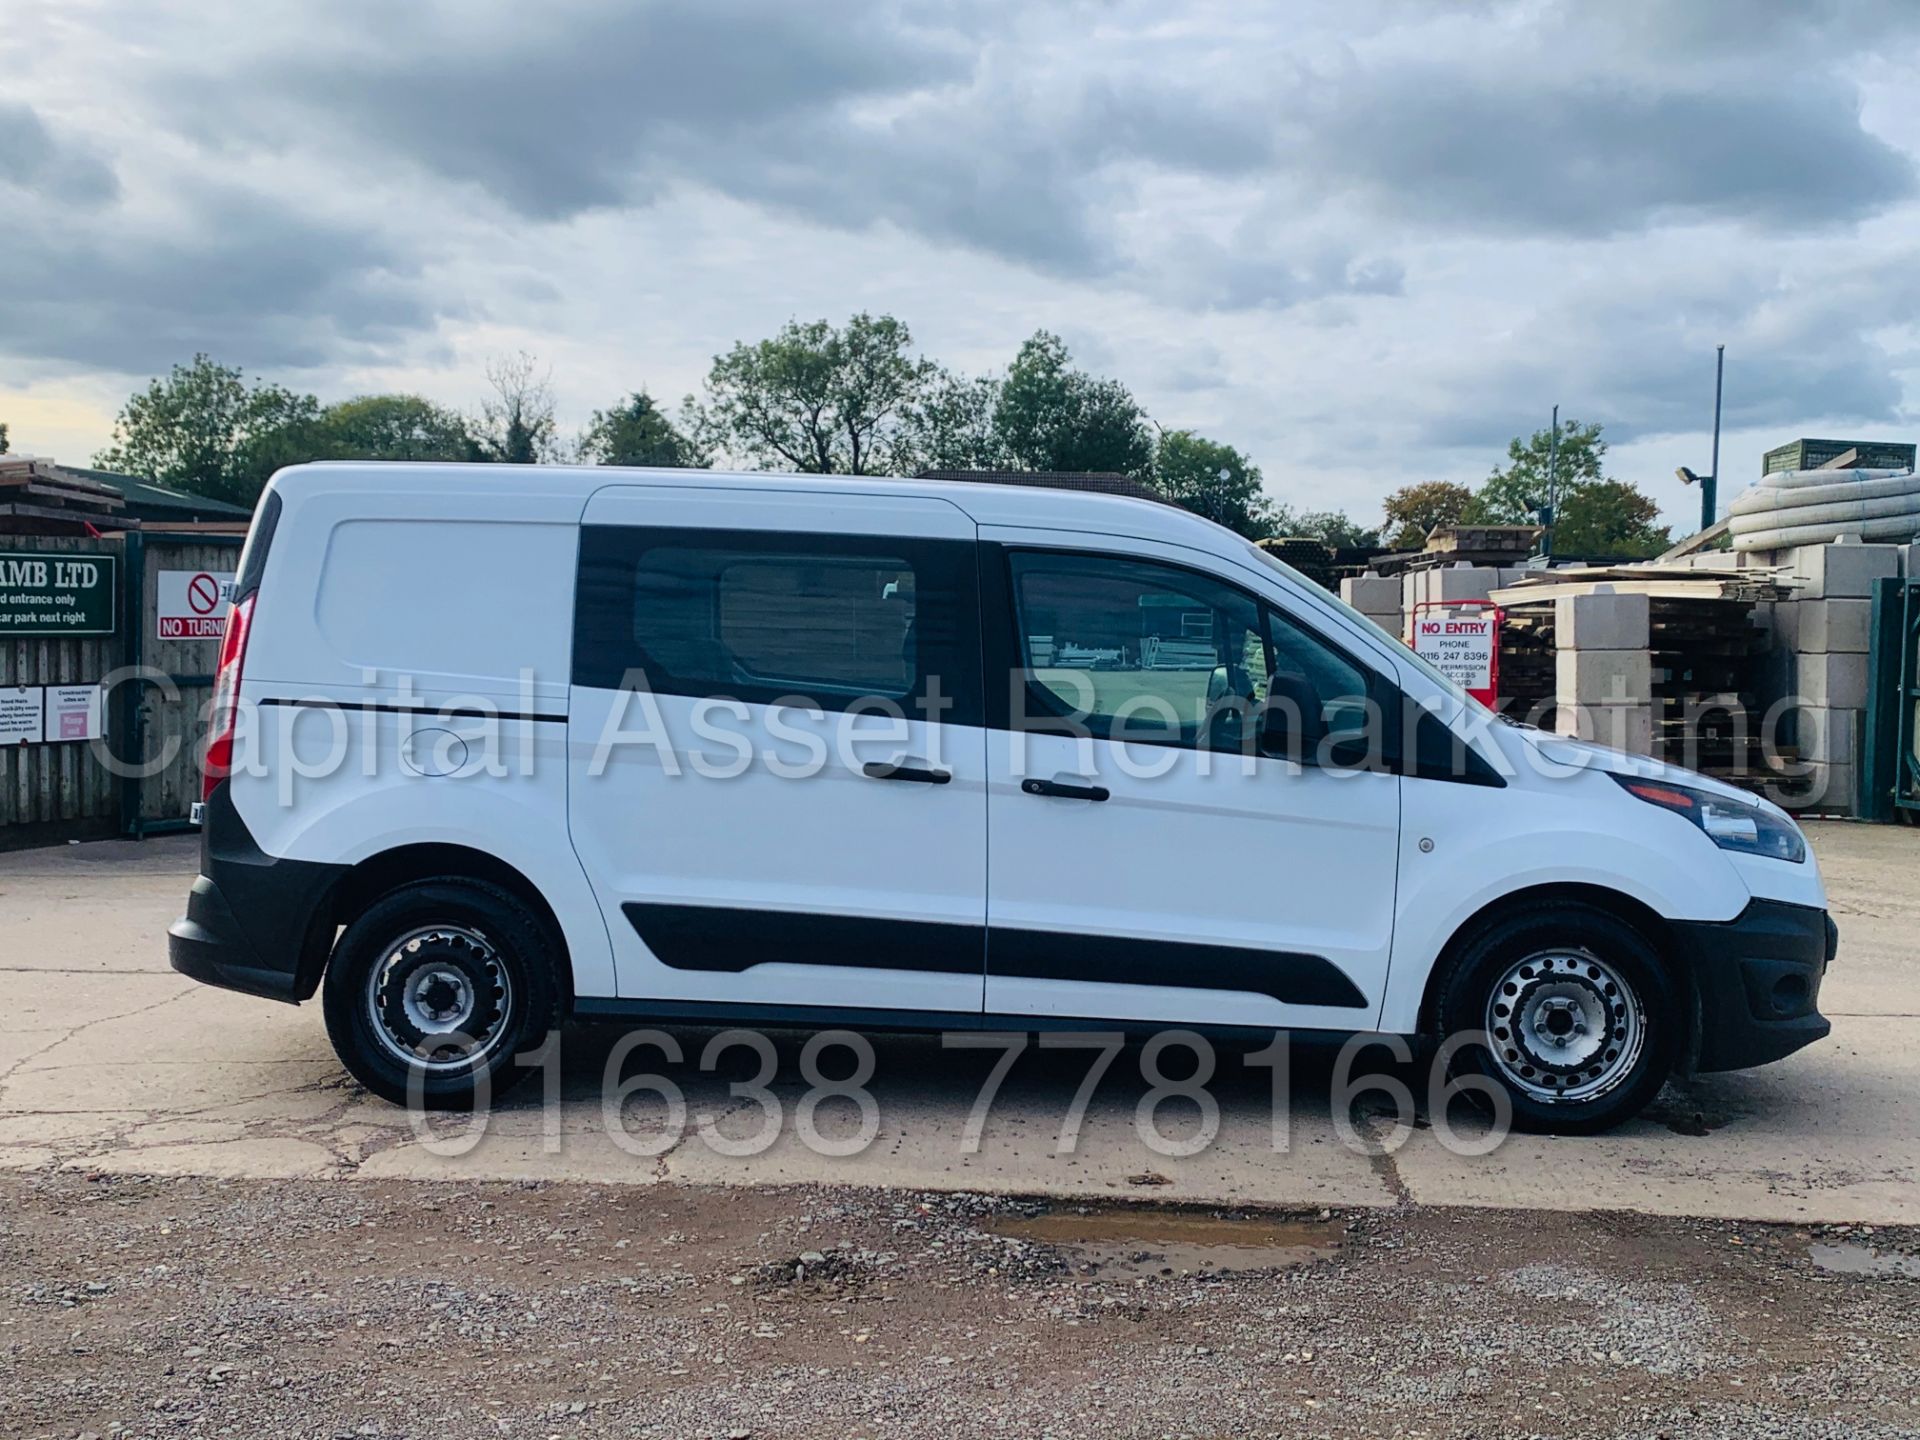 (ON SALE) FORD TRANSIT CONNECT *LWB- 5 SEATER CREW VAN* (2018 - EURO 6) 1.5 TDCI *AIR CON* (1 OWNER) - Image 10 of 40